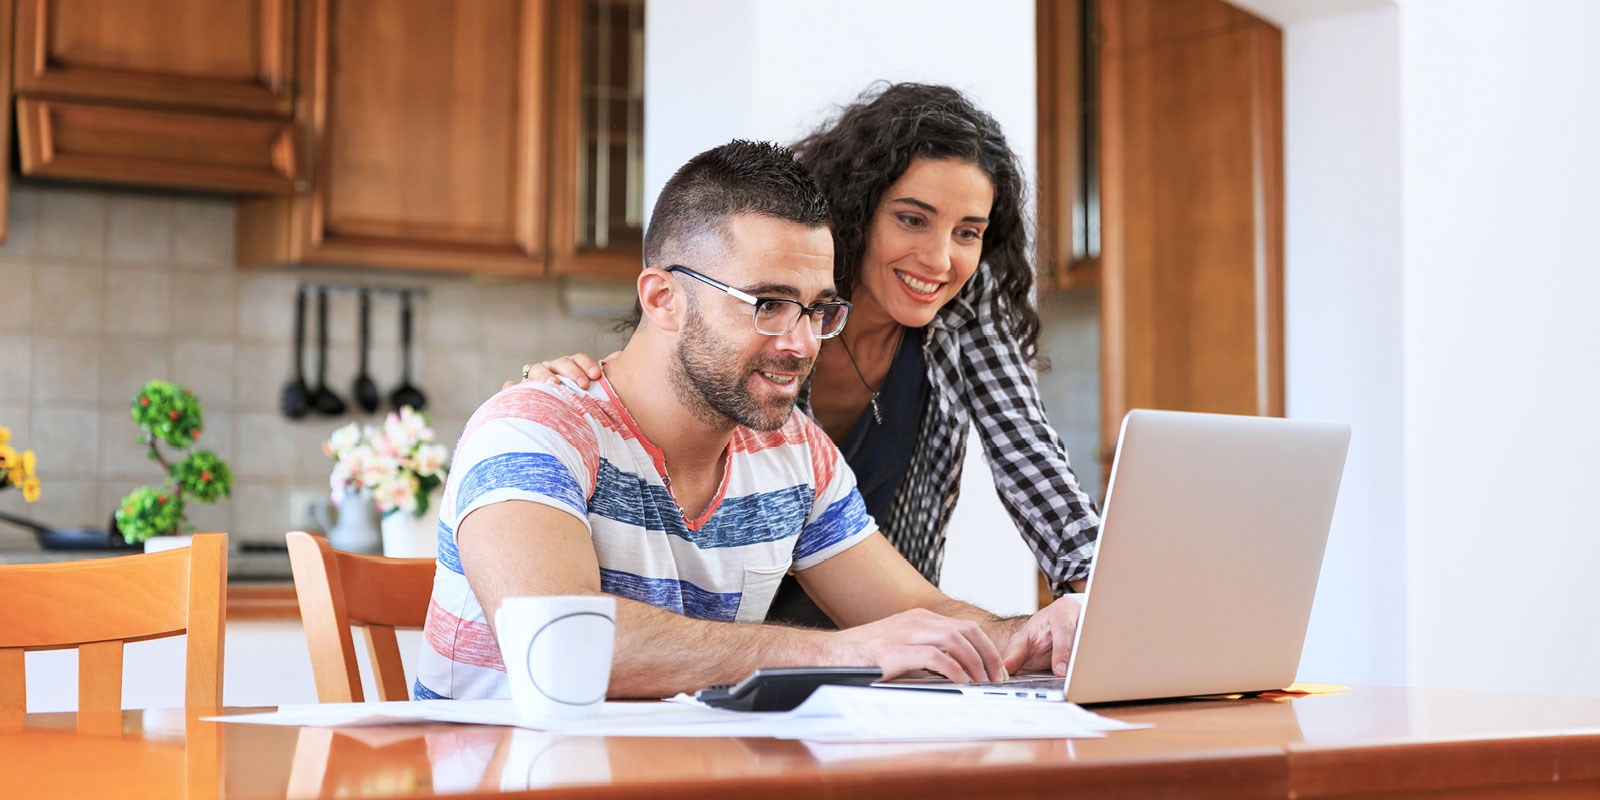 couple looking at laptop together, smiling